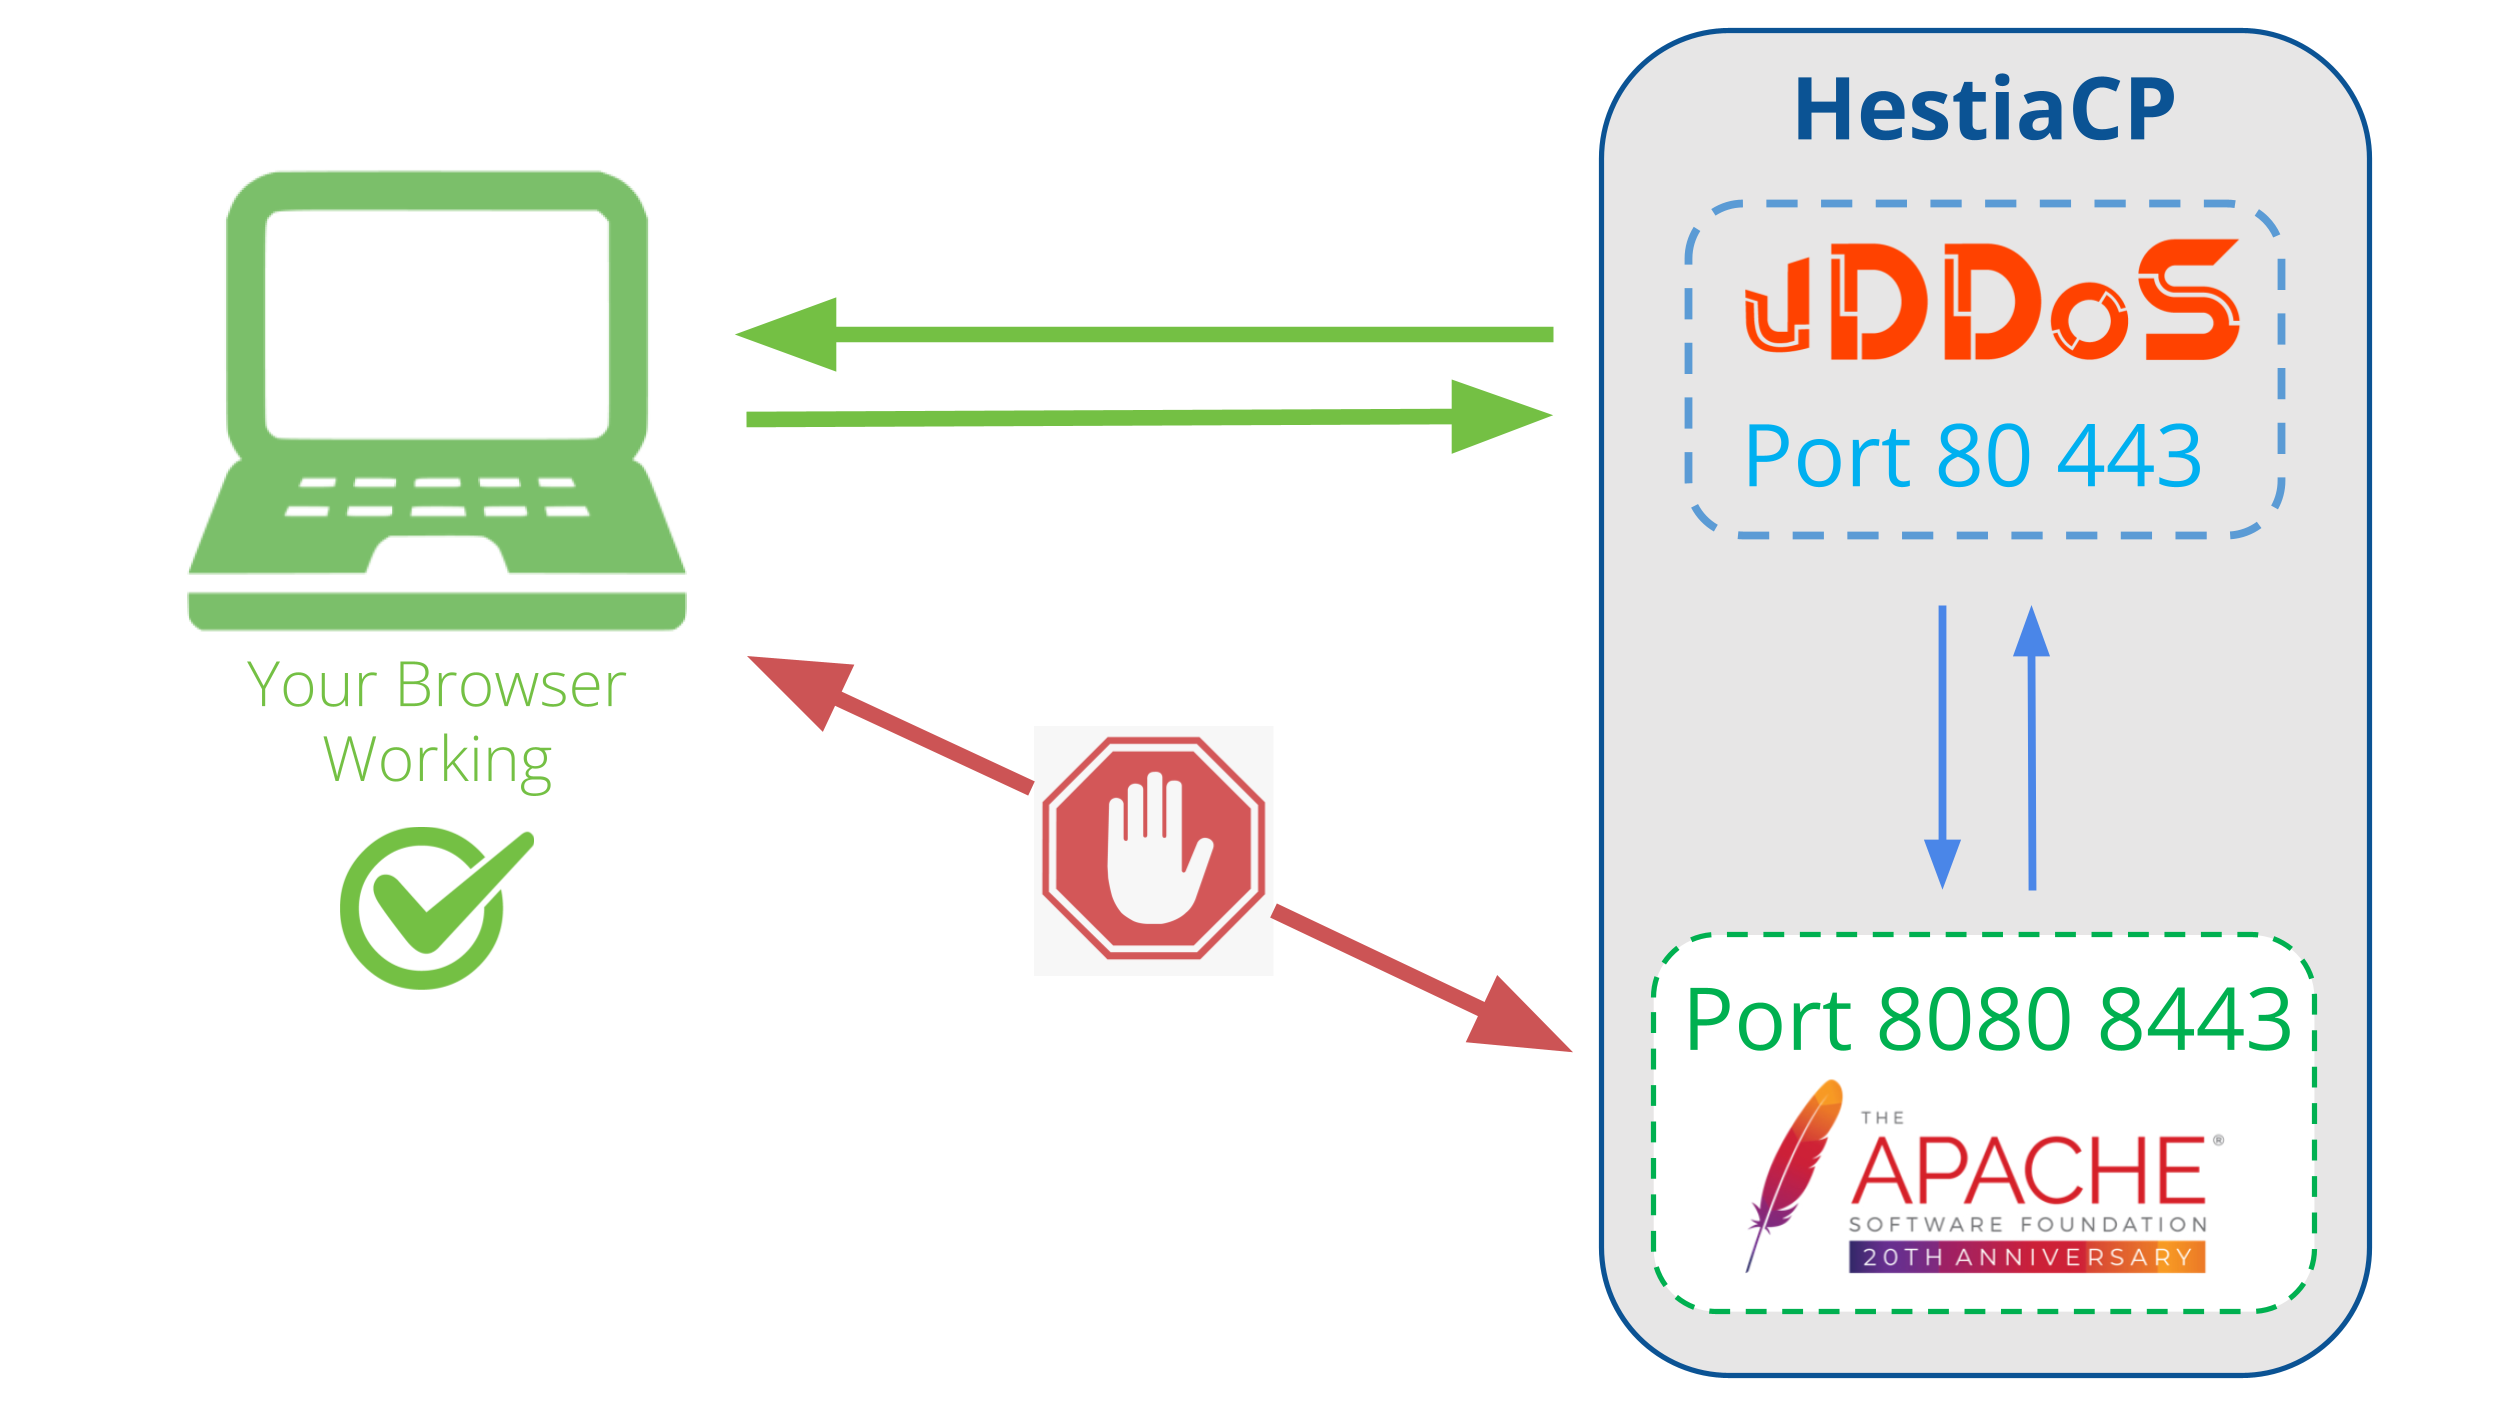 AntiDDoS-for-HestiaCP-with-vDDoS-Proxy-Protection1.png